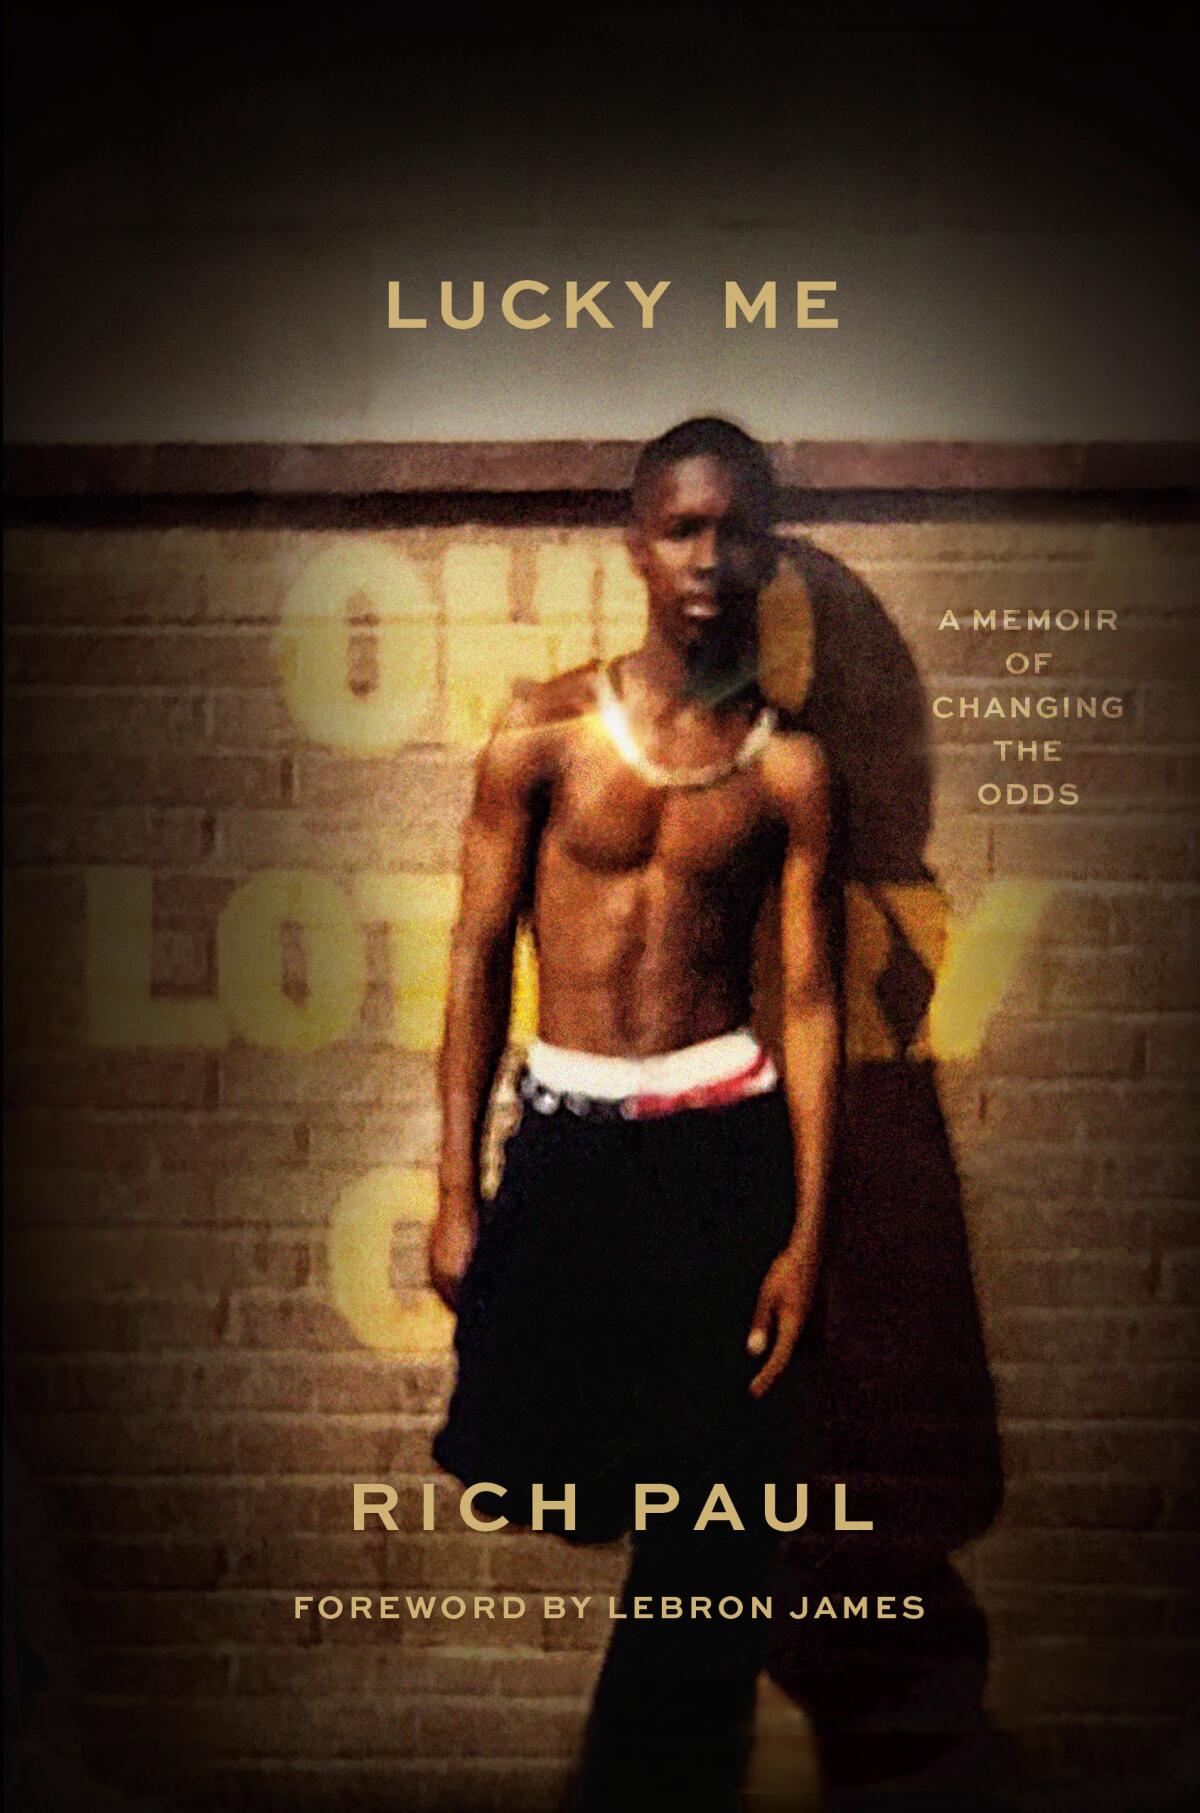 A young Rich Paul stands shirtless in front of a fence on the book jacket of his memoir "Lucky Me."